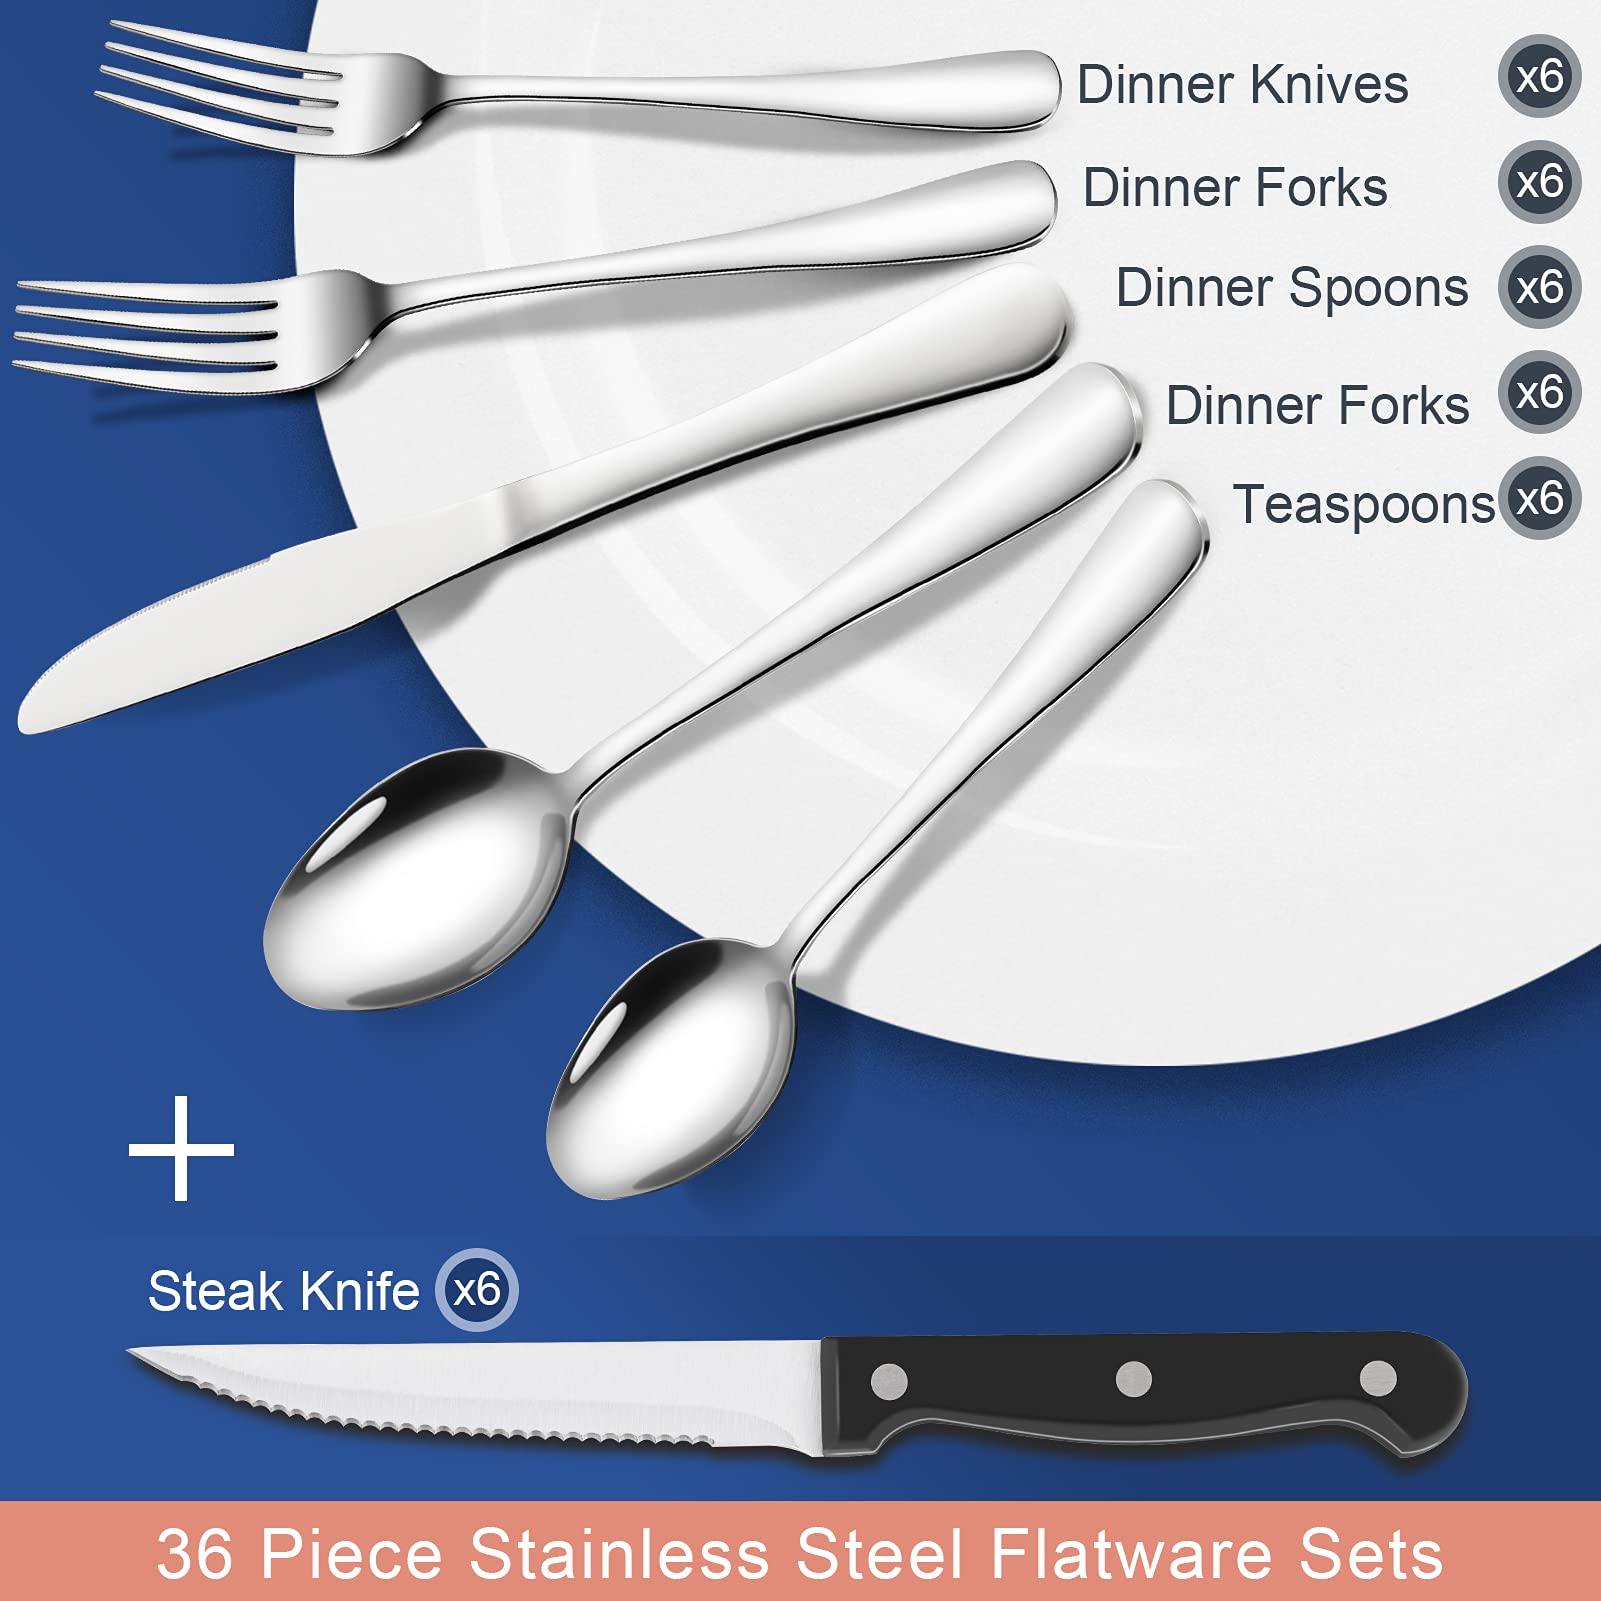 CIBEAT 24 Piece S592 Stainless Steel Silverware Set with Steak Knives